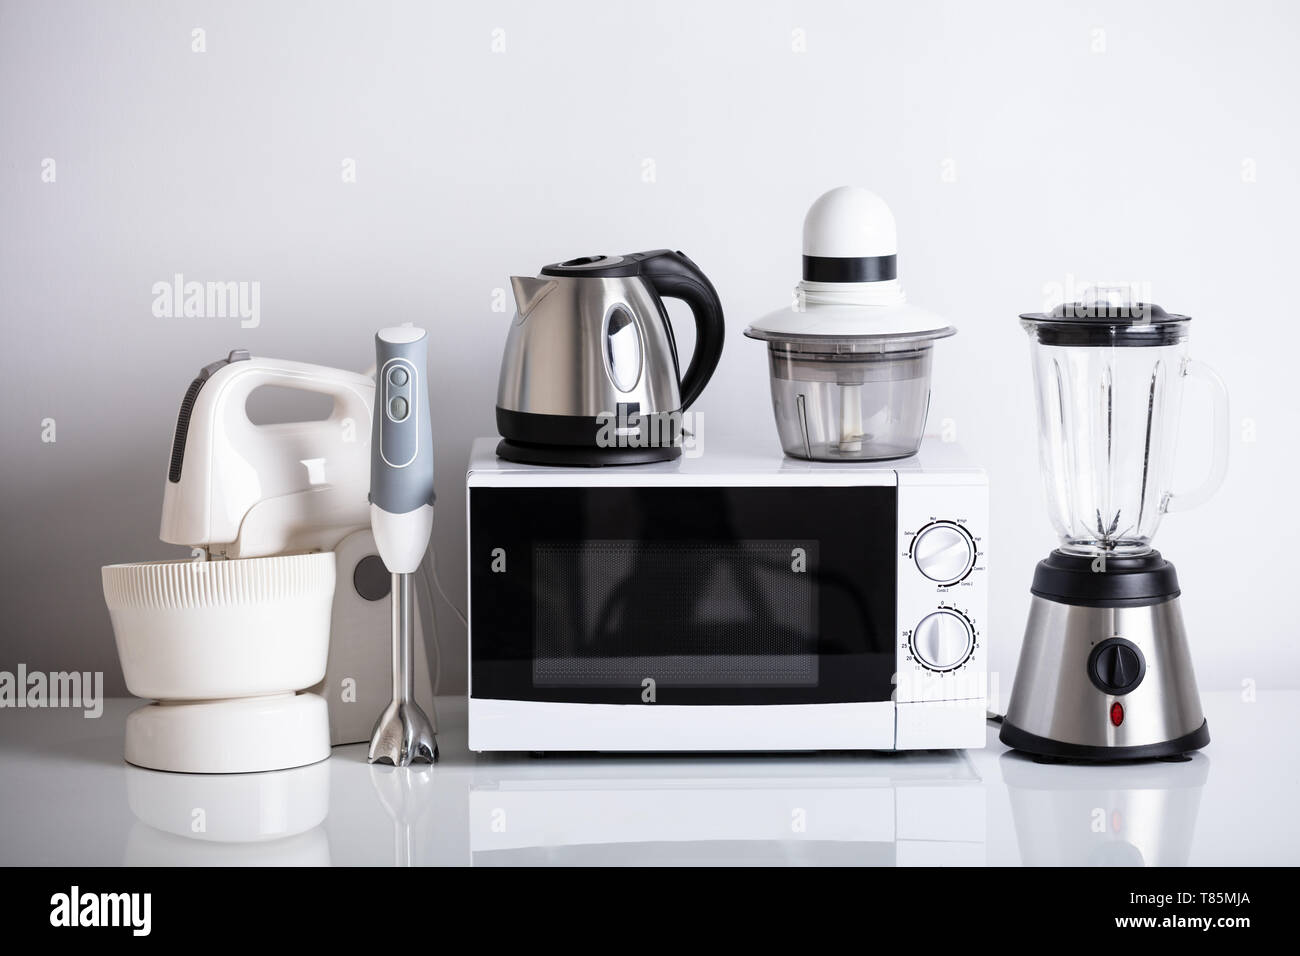 Variety Of Kitchen Appliances With Oven Over Reflective Desk Stock Photo